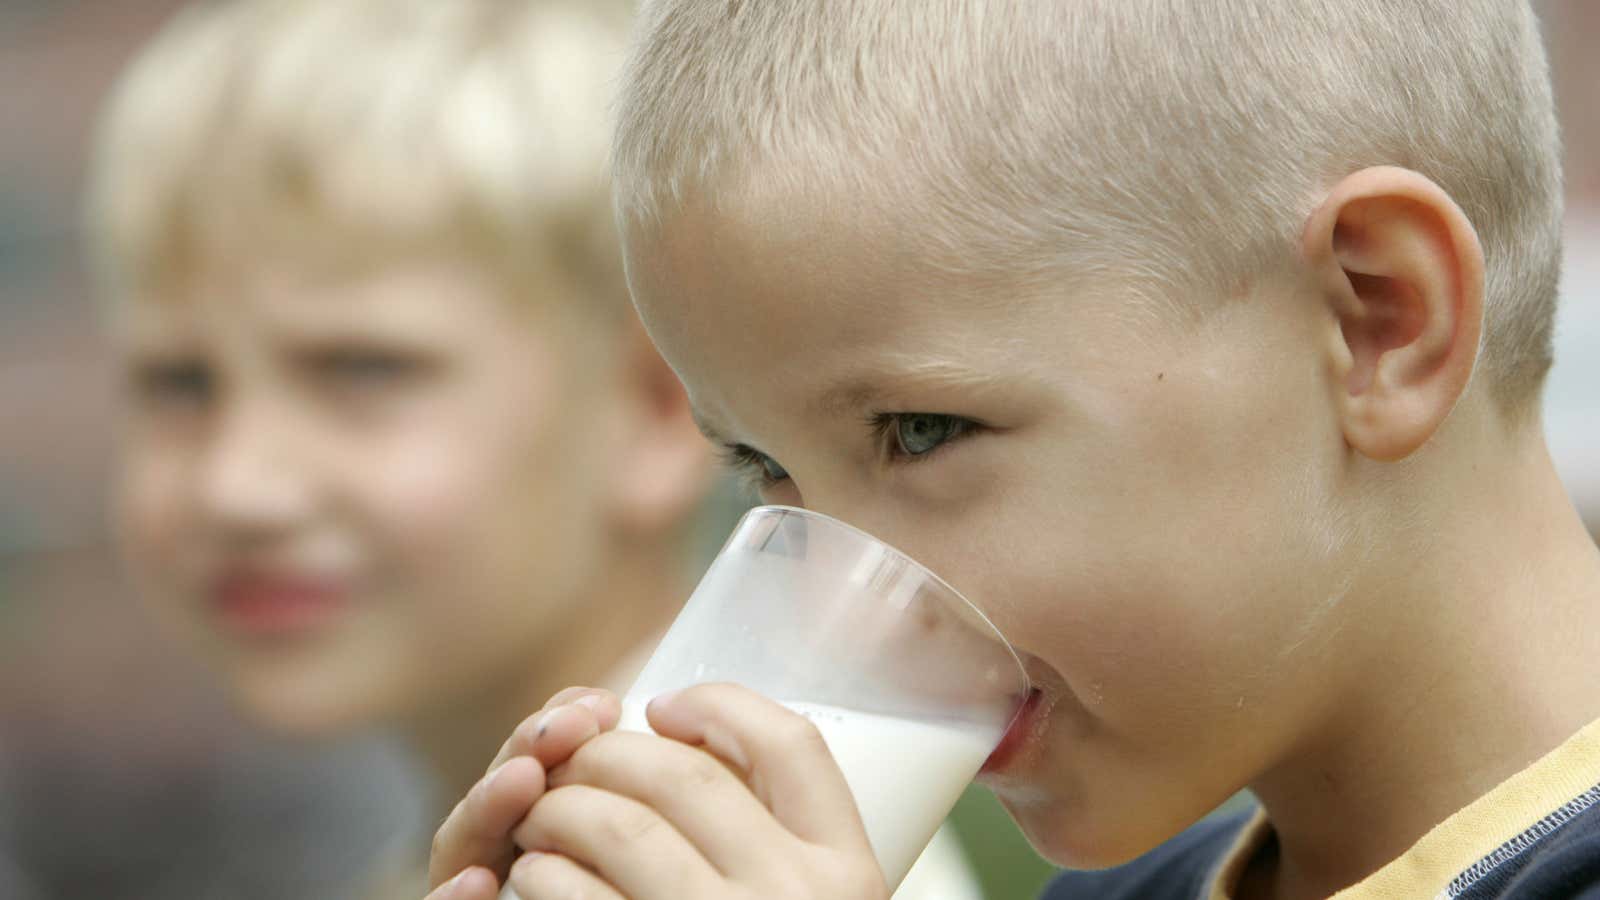 There have been more milk drinkers in Britain in recent years.